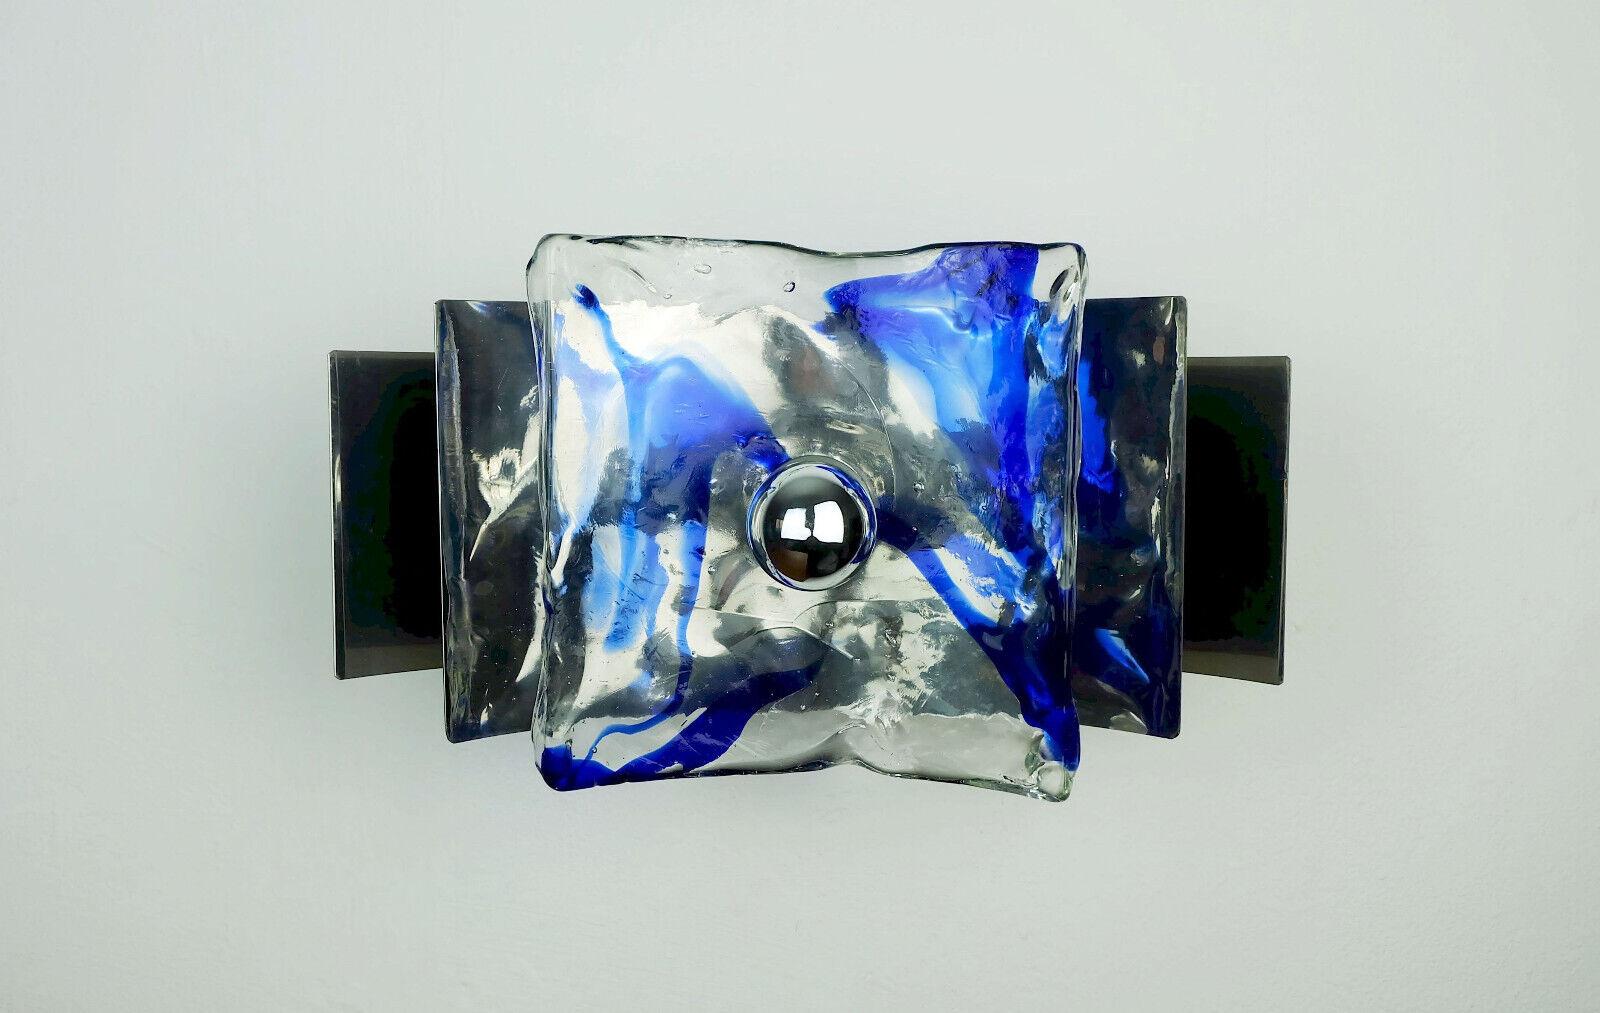 A very beautiful 1960s to 70s mid century wall lamp. No label, origin most probably Italy. It consists of 2 rectangular curved sheets made of chromed metal and a curved square disc made of thick transparent ice glass with blue inclusions. Holds 1